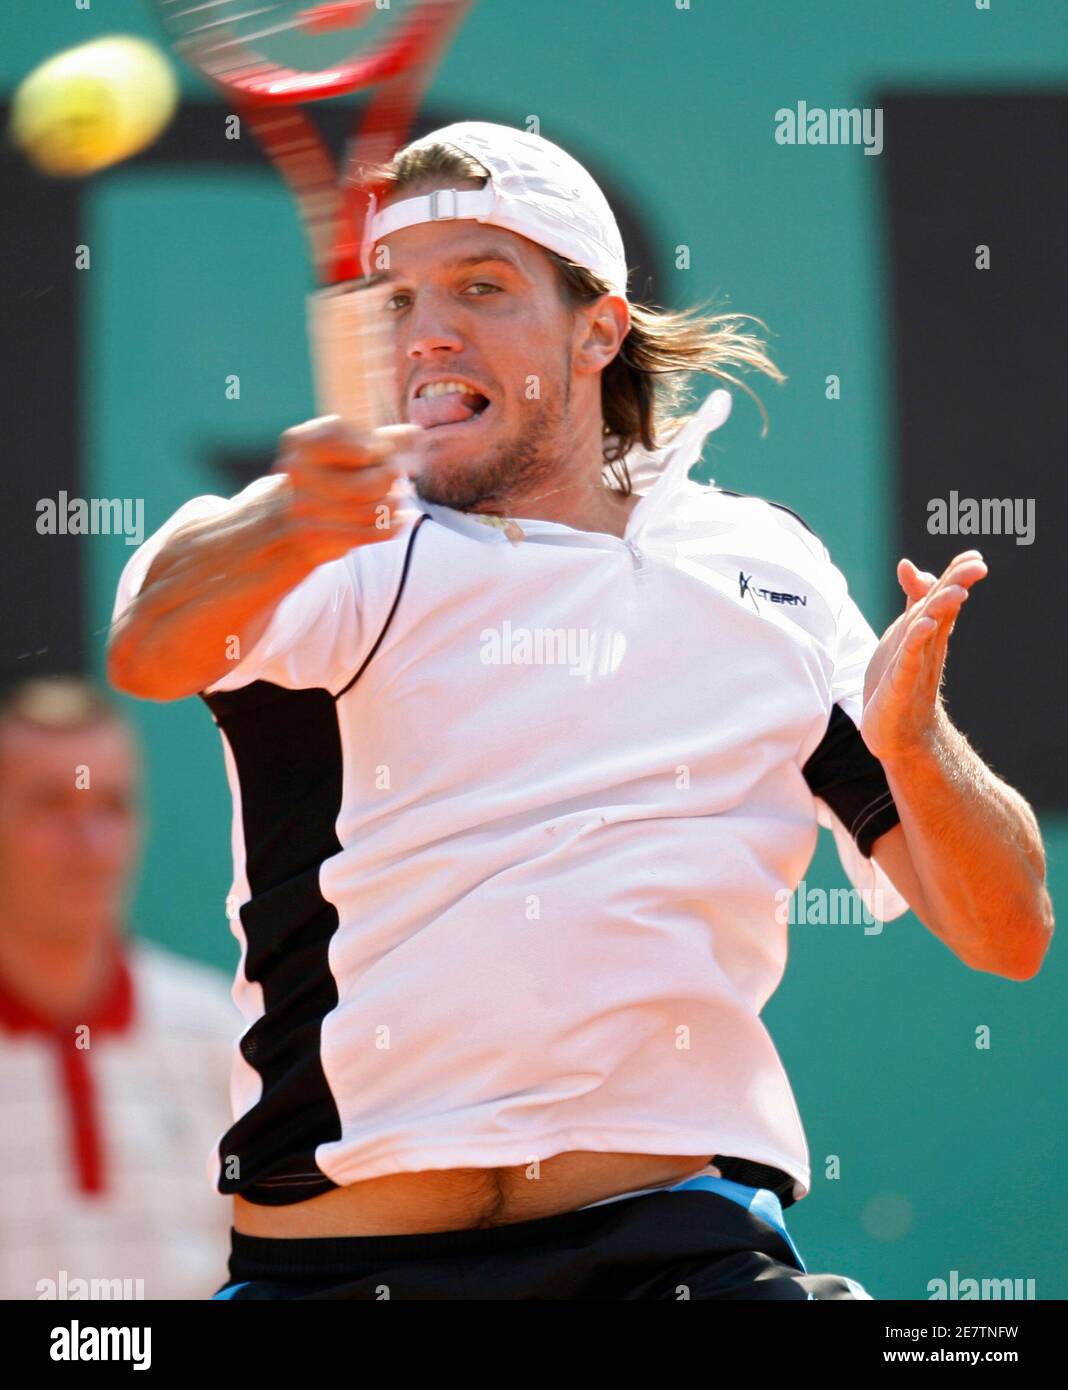 Argentina's Juan Pablo Brzezicki hits a return to Spain's Carlos Moya at the French Open tennis tournament at Roland Garros in Paris June 2, 2007.  REUTERS/Charles Platiau (FRANCE) Stock Photo